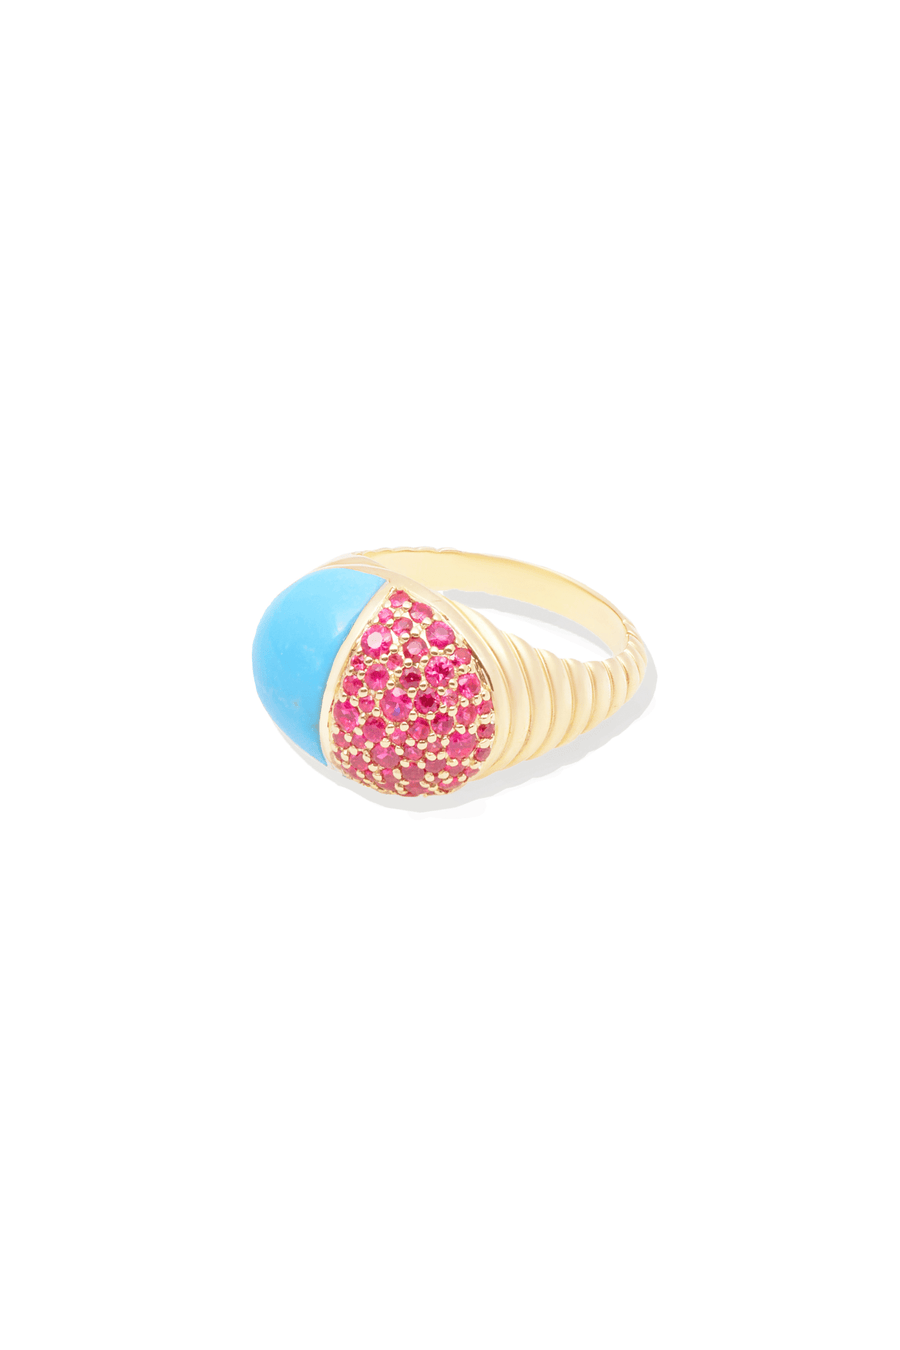 Found Cap Cocktail Ring - Turquoise & Pink Sapphire